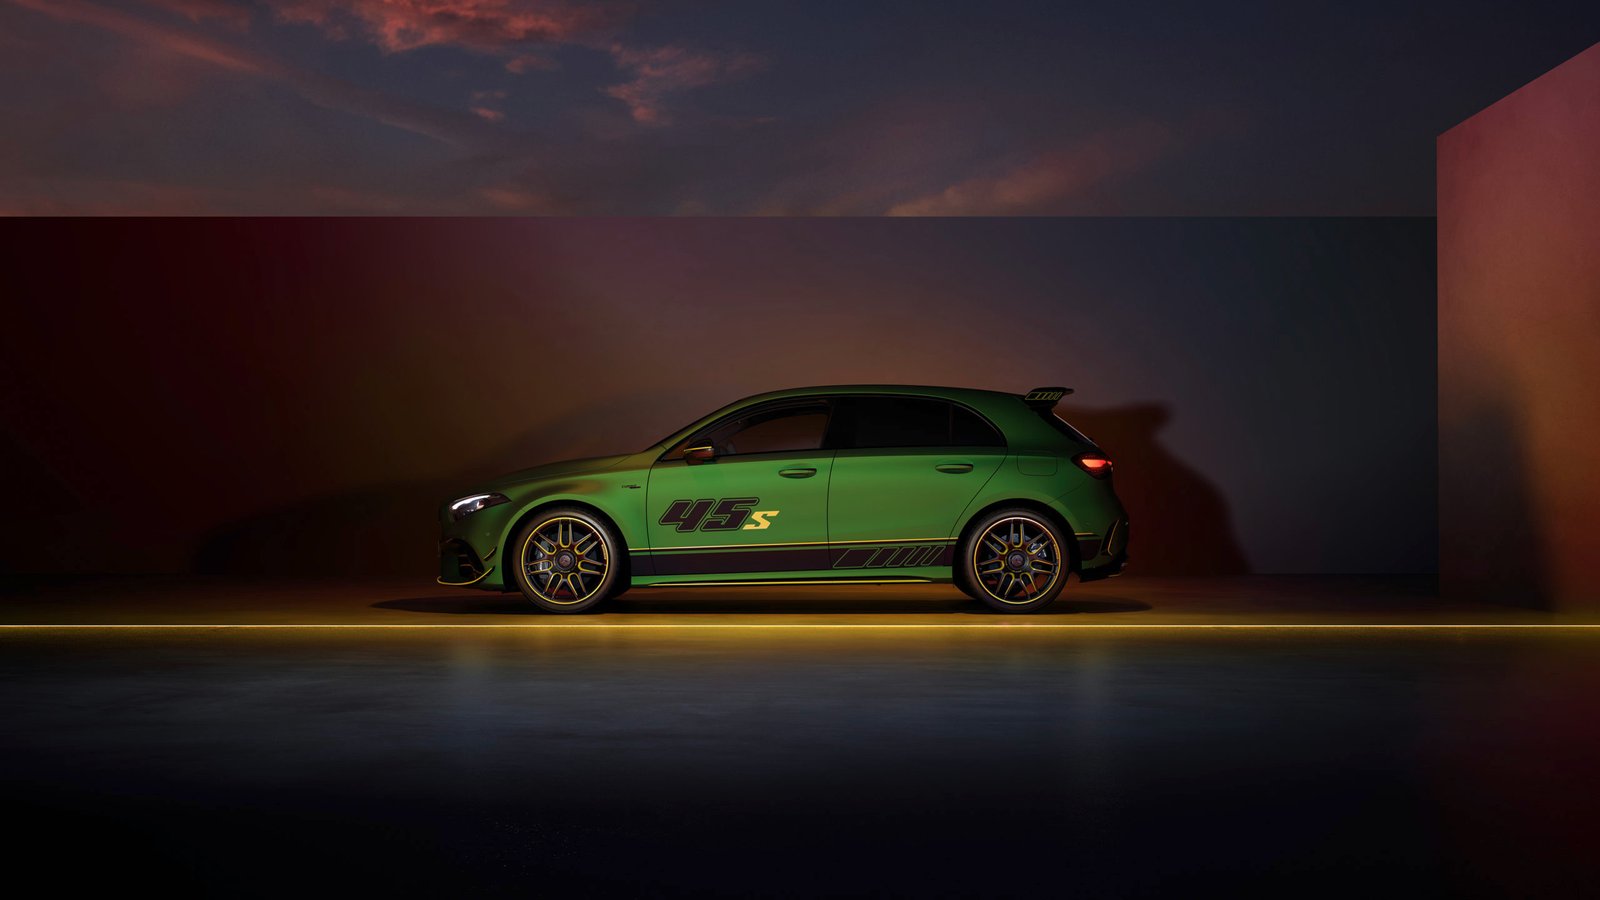 Mercedes-AMG A 45 S 4MATIC+ als Sondermodell „Limited Edition“ ab sofort bestellbarMercedes-AMG A 45 S 4MATIC+ can now be ordered as a special “Limited Edition” model